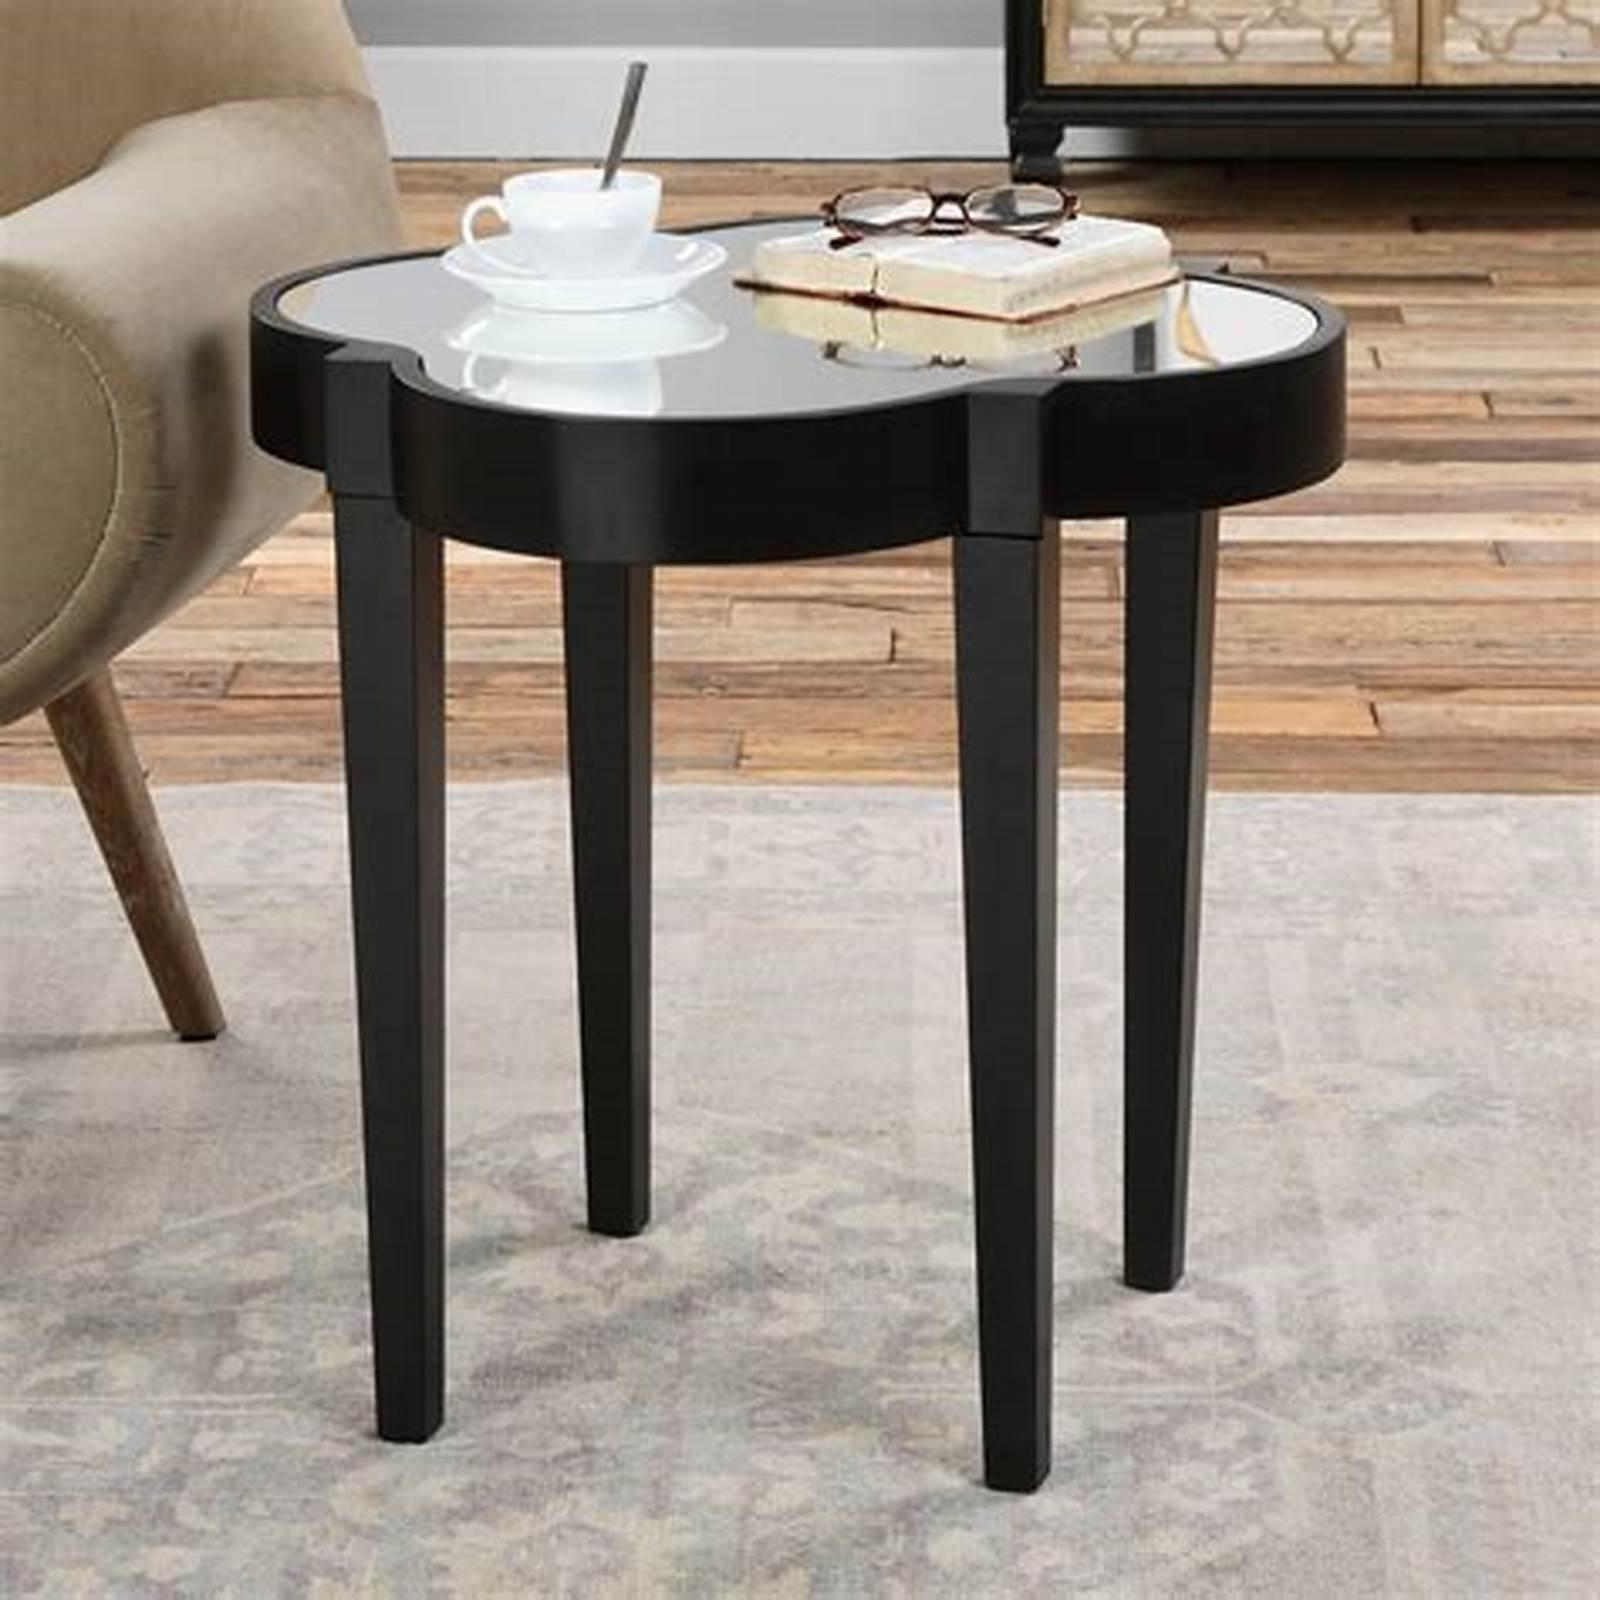 quatrefoil accent table tree life wood moroccan tray drum seat chairs three piece set black glass patio full length mirror fire pit rectangle uttermost martel console vintage with